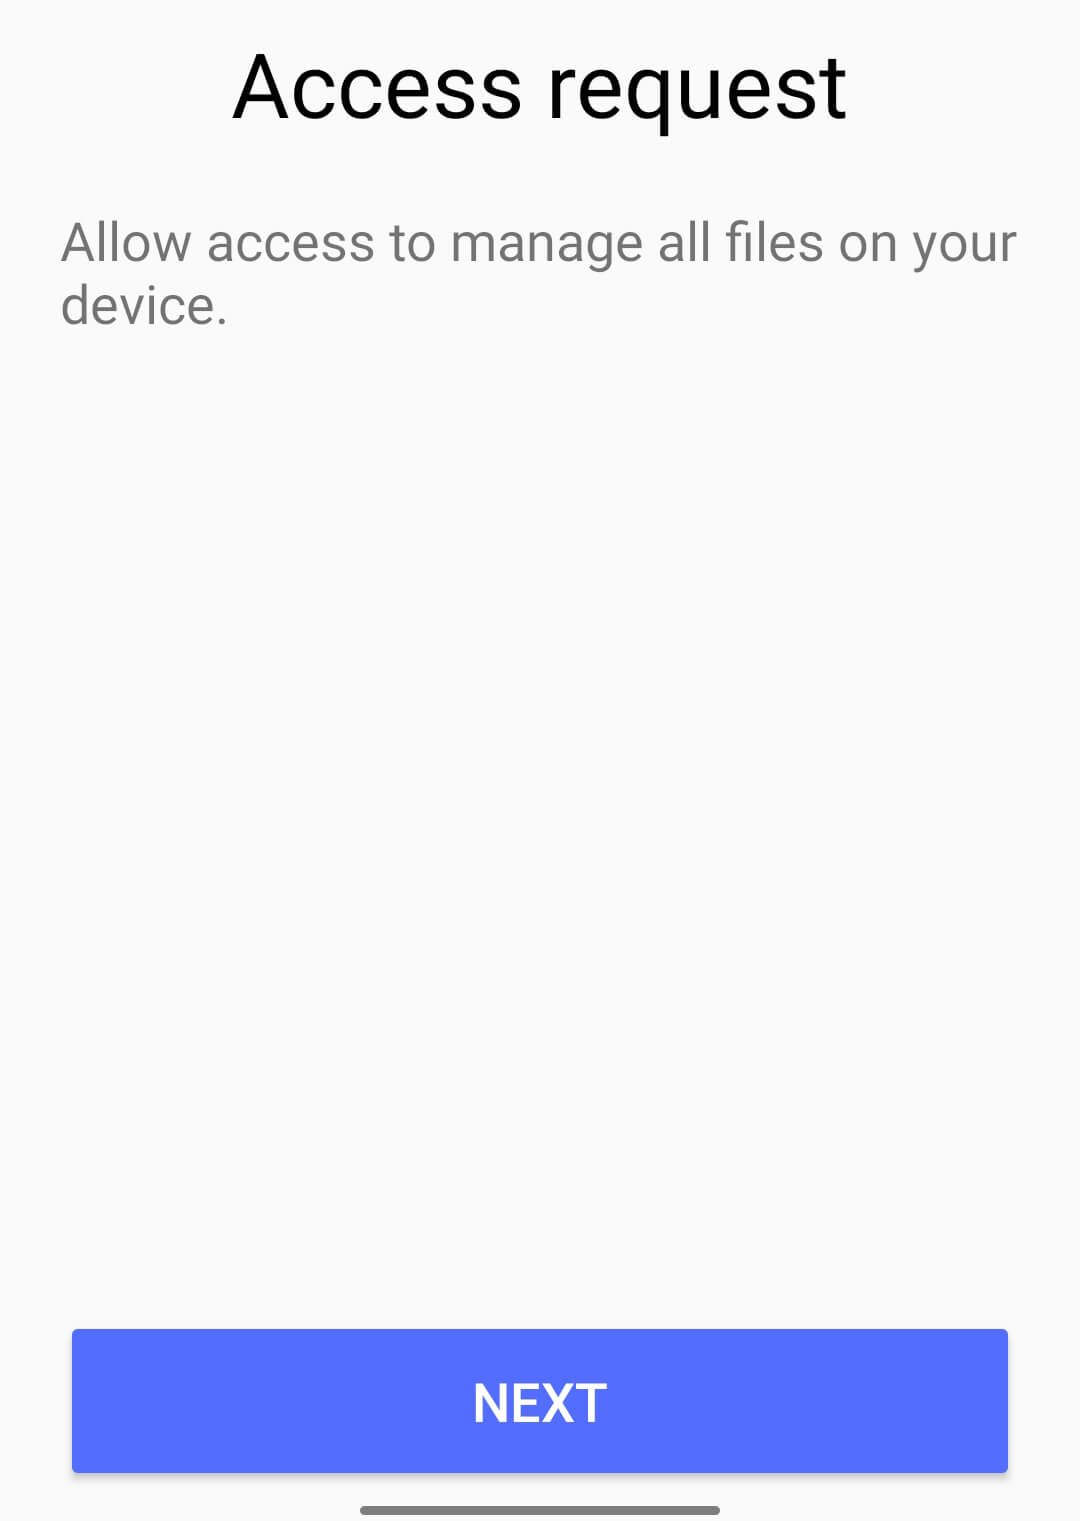 allow permissions